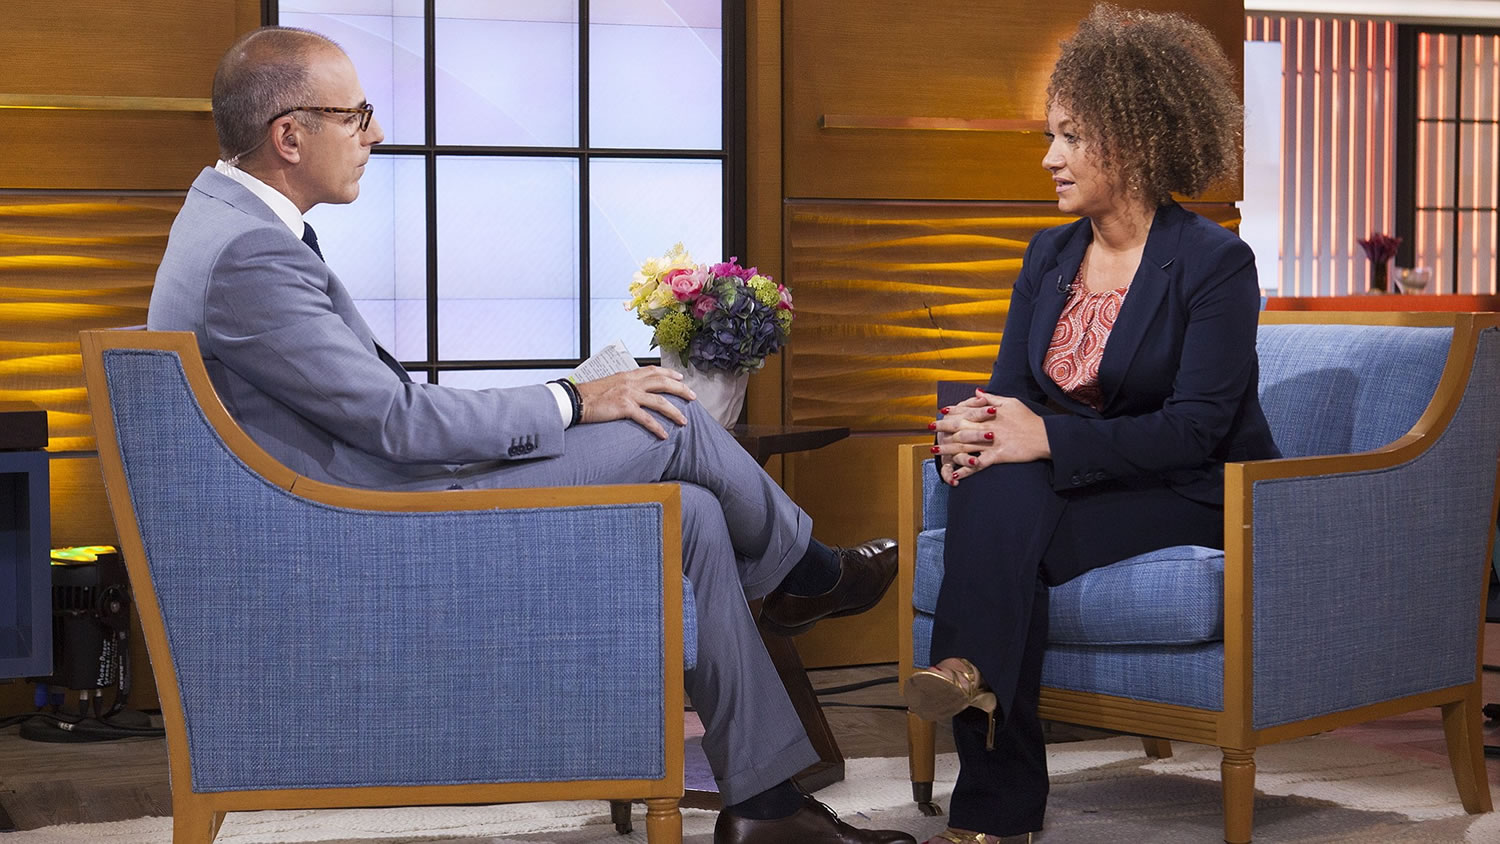 Former NAACP leader Rachel Dolezal appears on the &quot;Today&quot; show during an interview with co-host Matt Lauer on Tuesday in New York. Dolezal, who resigned as head of a NAACP chapter after her parents said she is white, said Tuesday that she started identifying as black around age 5, when she drew self-portraits with a brown crayon, and &quot;takes exception&quot; to the contention that she tried to deceive people.